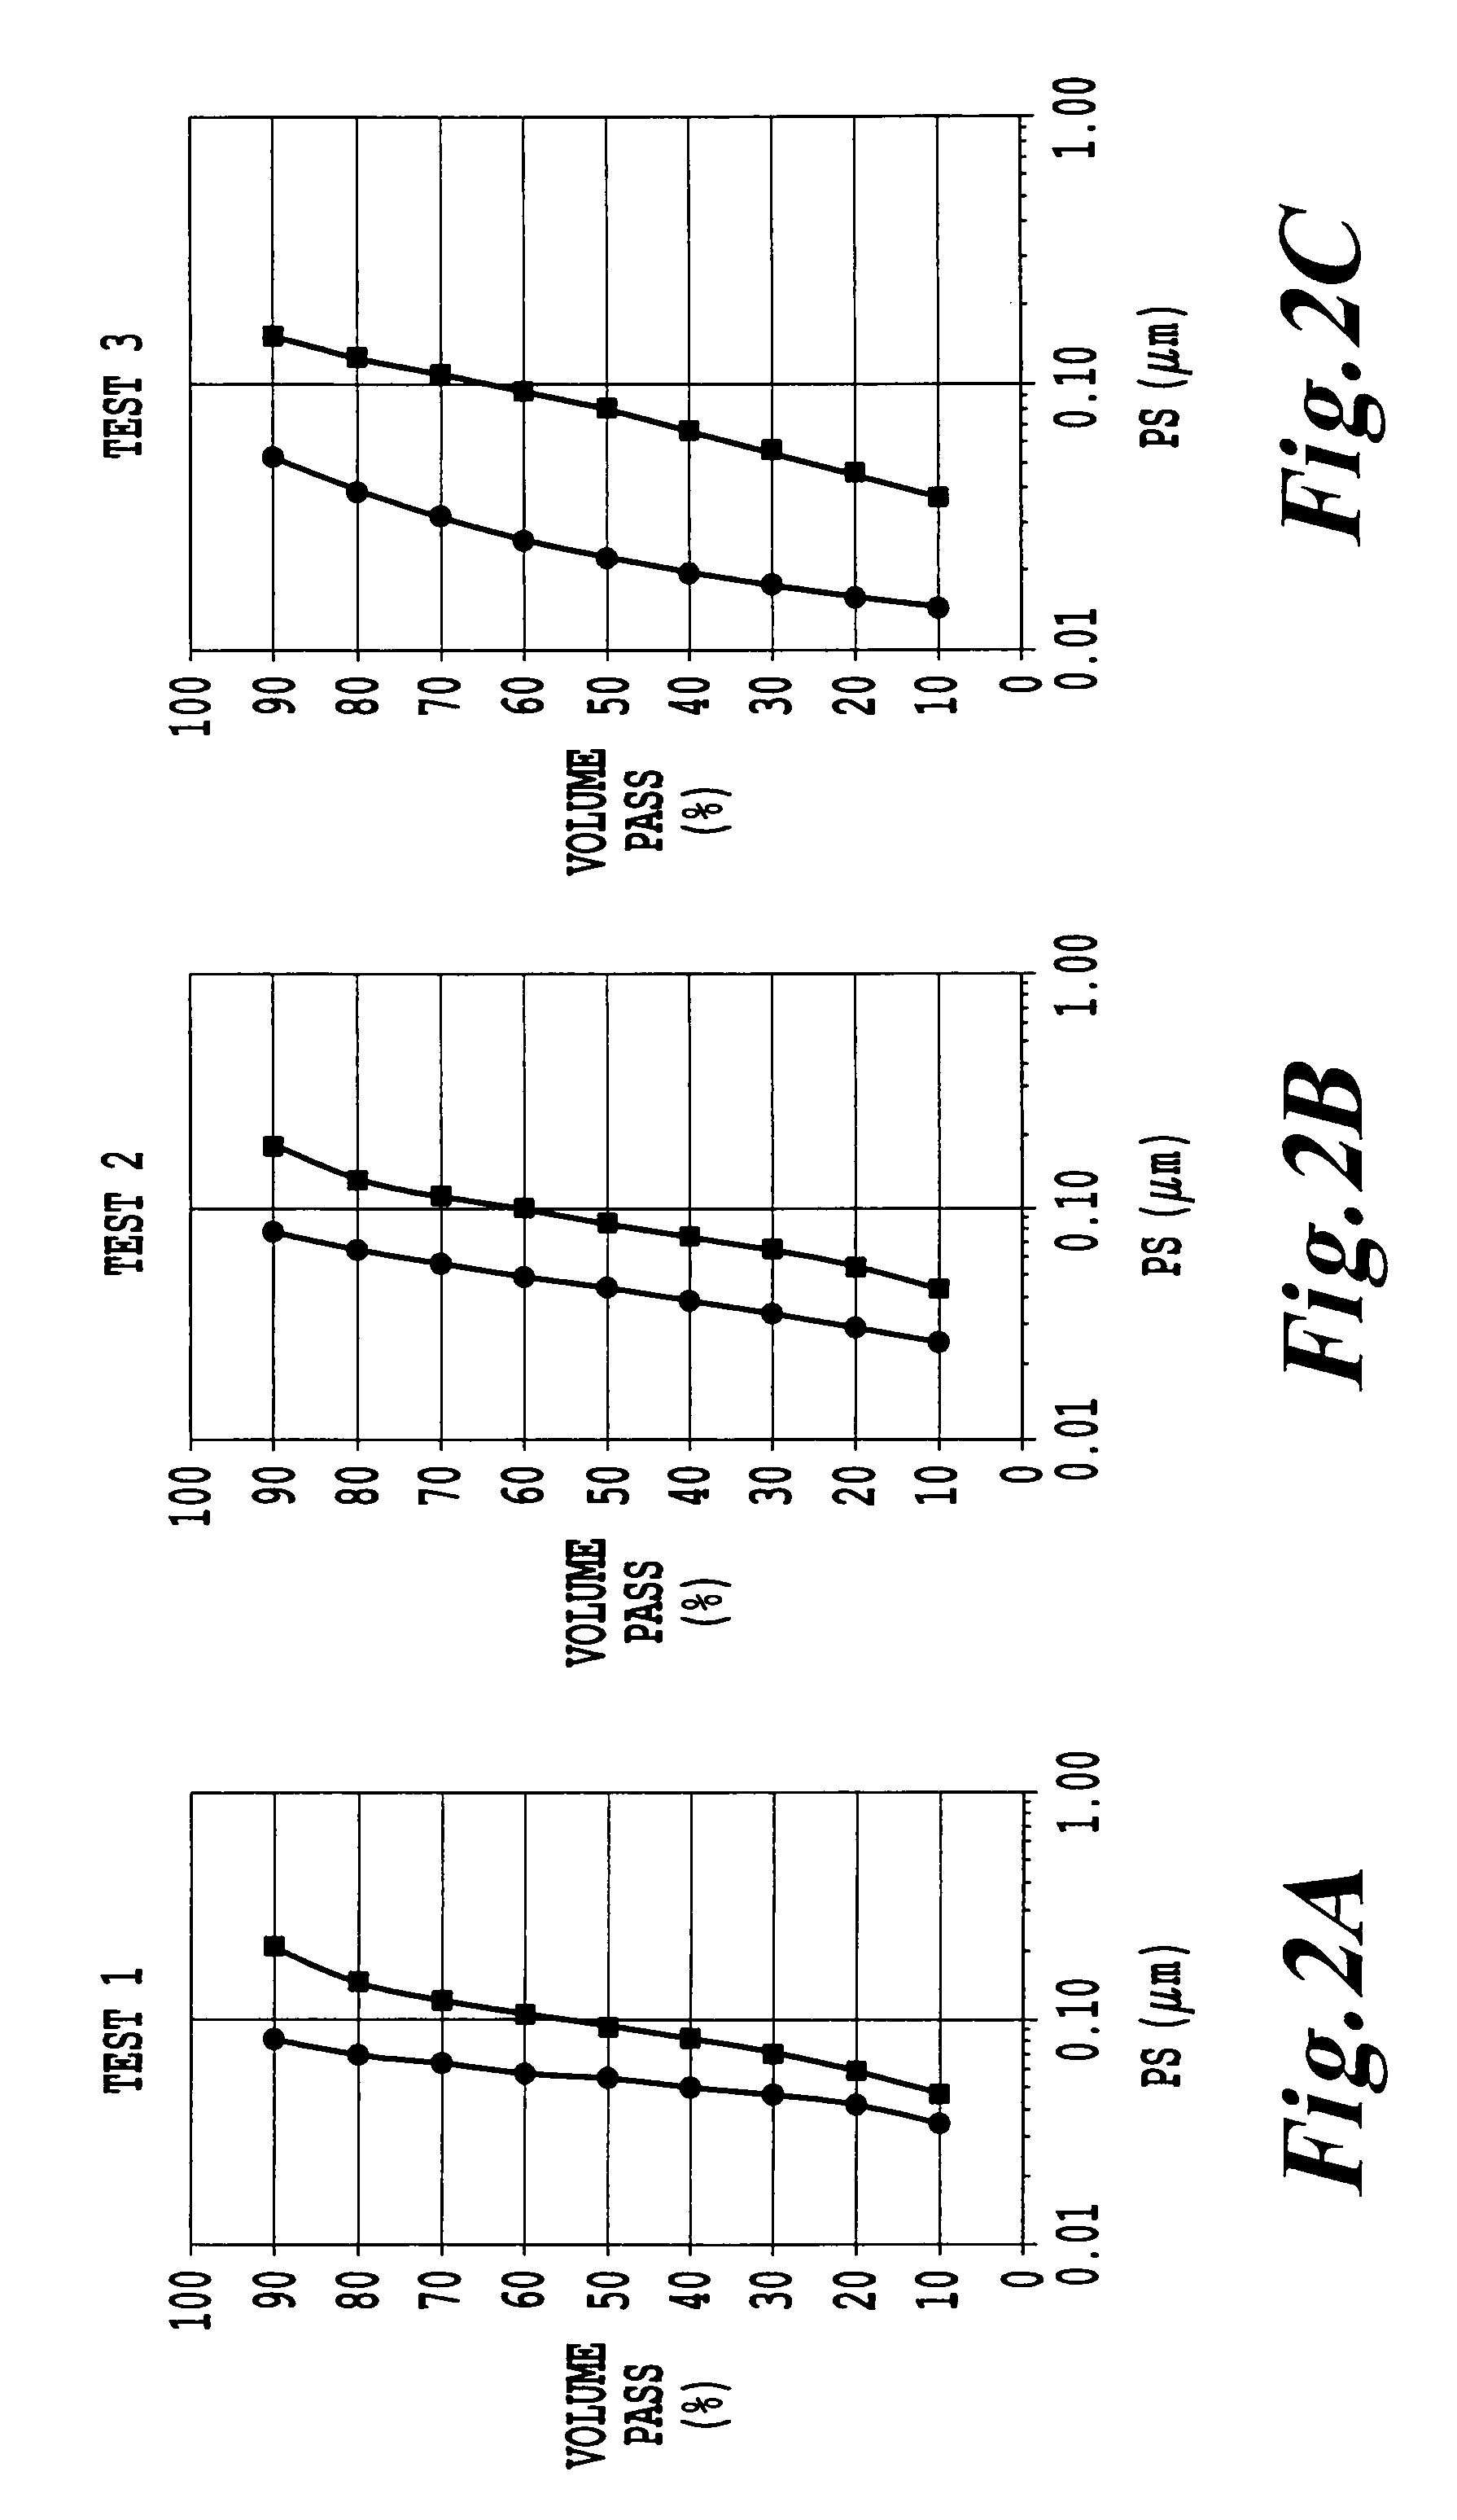 Method of fractionating oxidic nanoparticles by crossflow membrane filtration